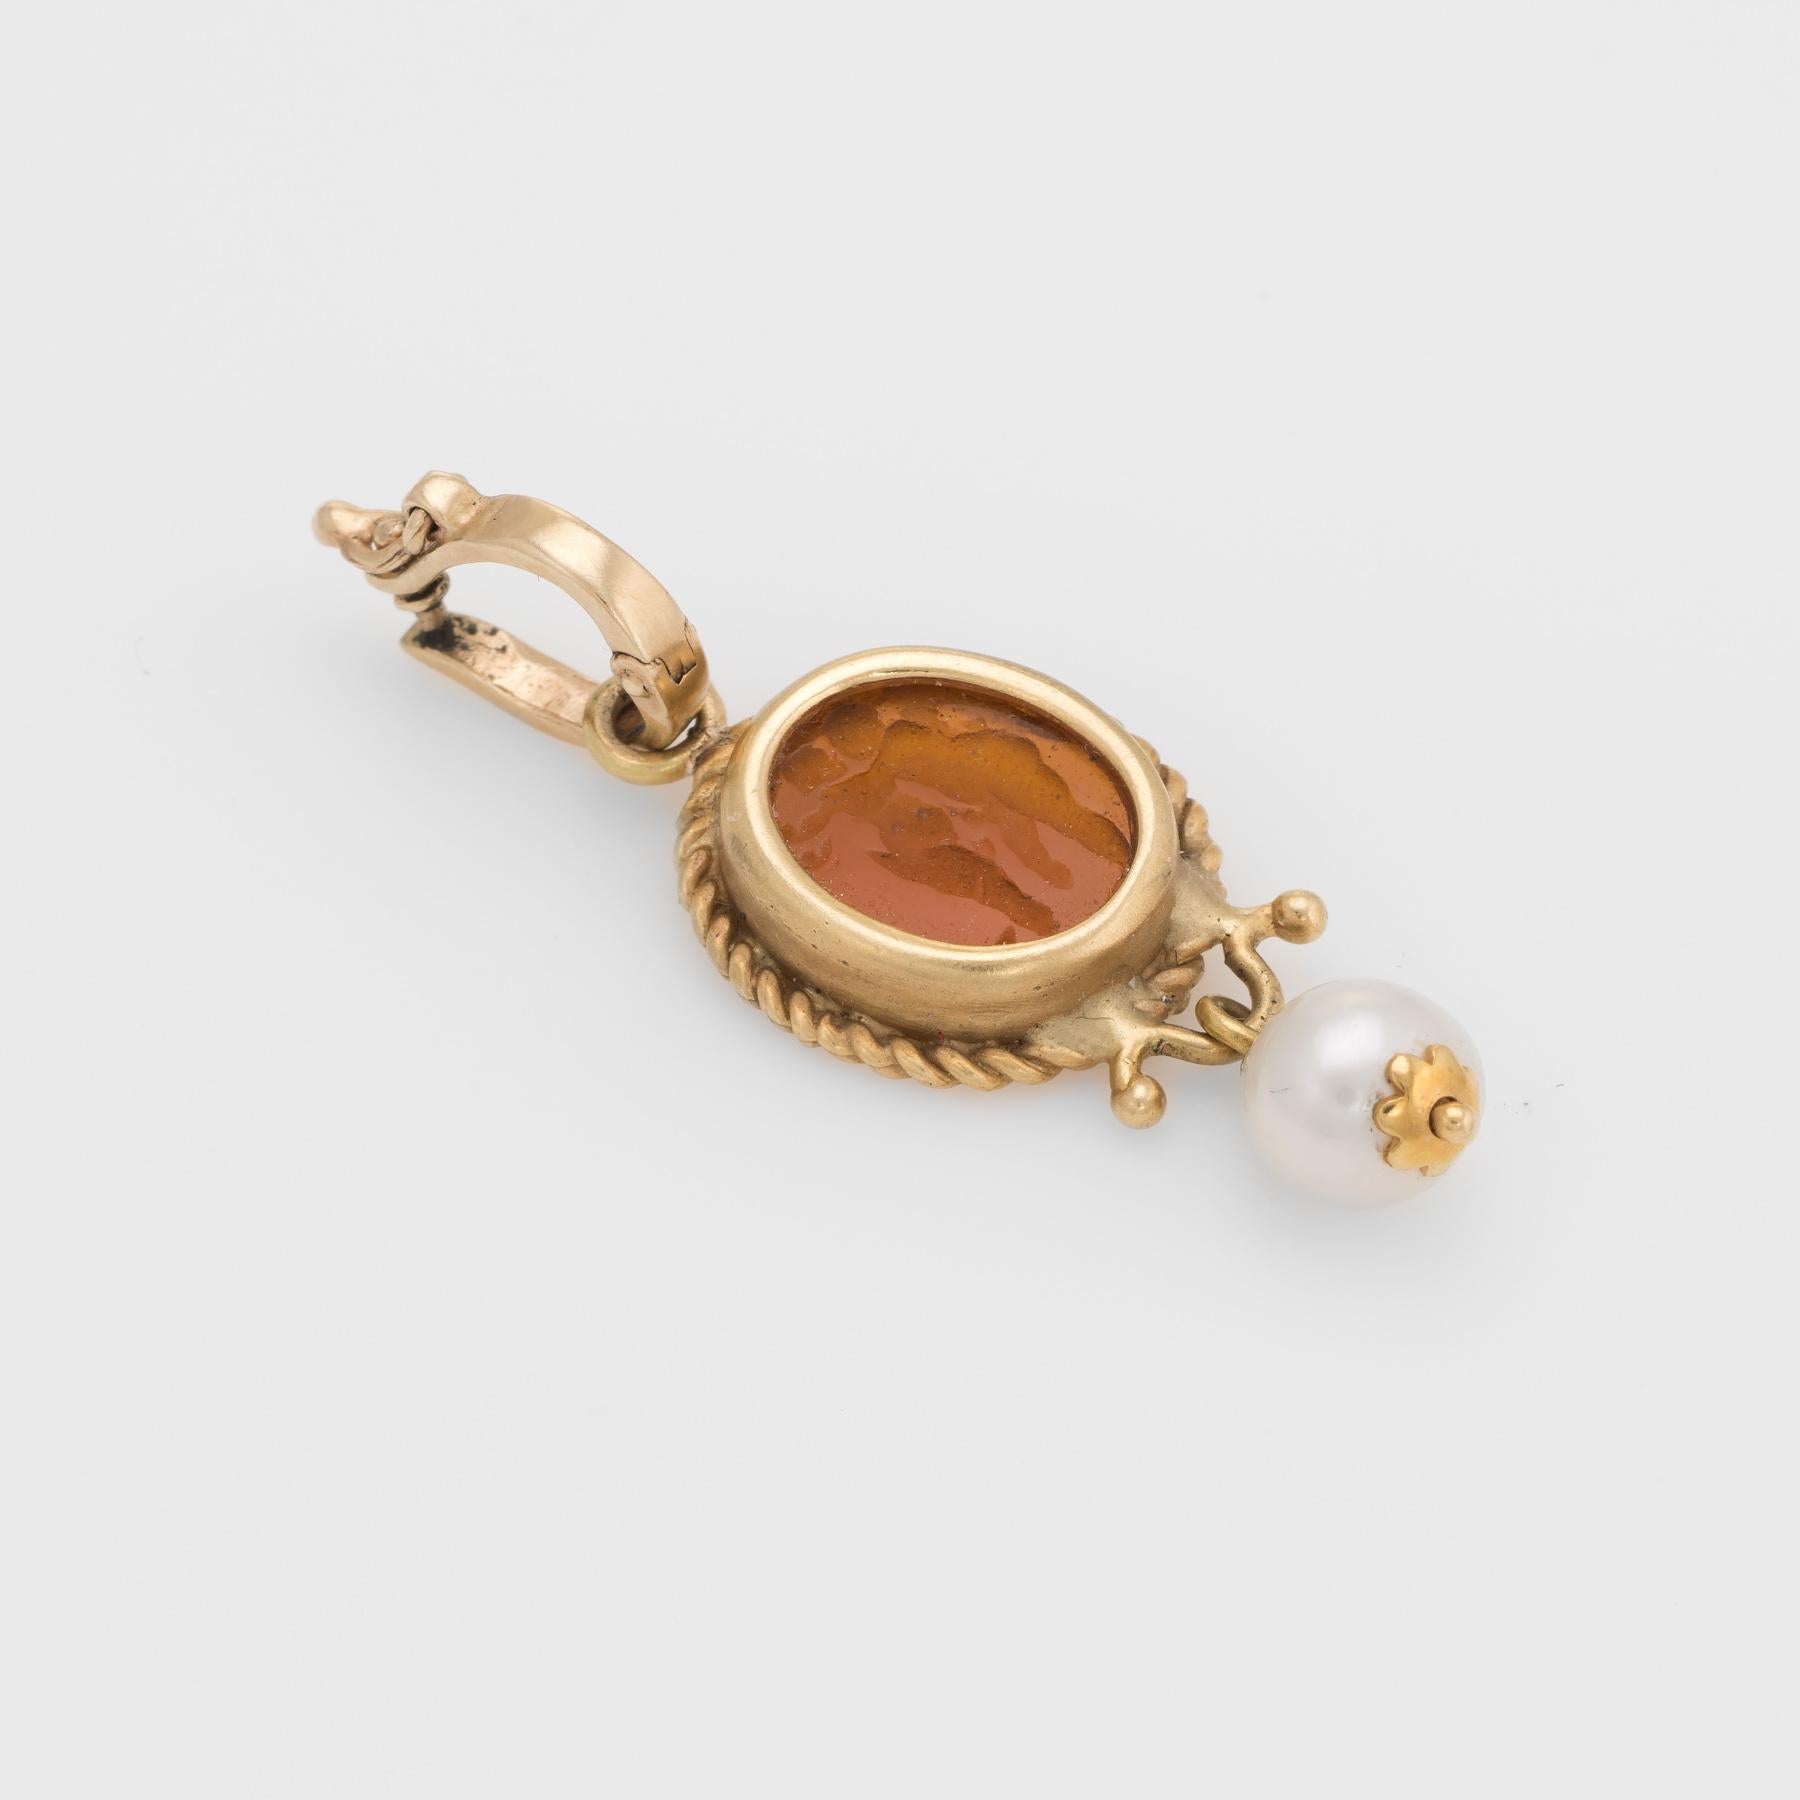 Finely detailed Venetian glass pendant, crafted in 14 karat yellow gold. 

Venetian glass in an amber hue measures 10mm x 8mm and features an intaglio of two winged cherubs. One 6mm cultured pearl is attached to the base of the pendant.

The pendant